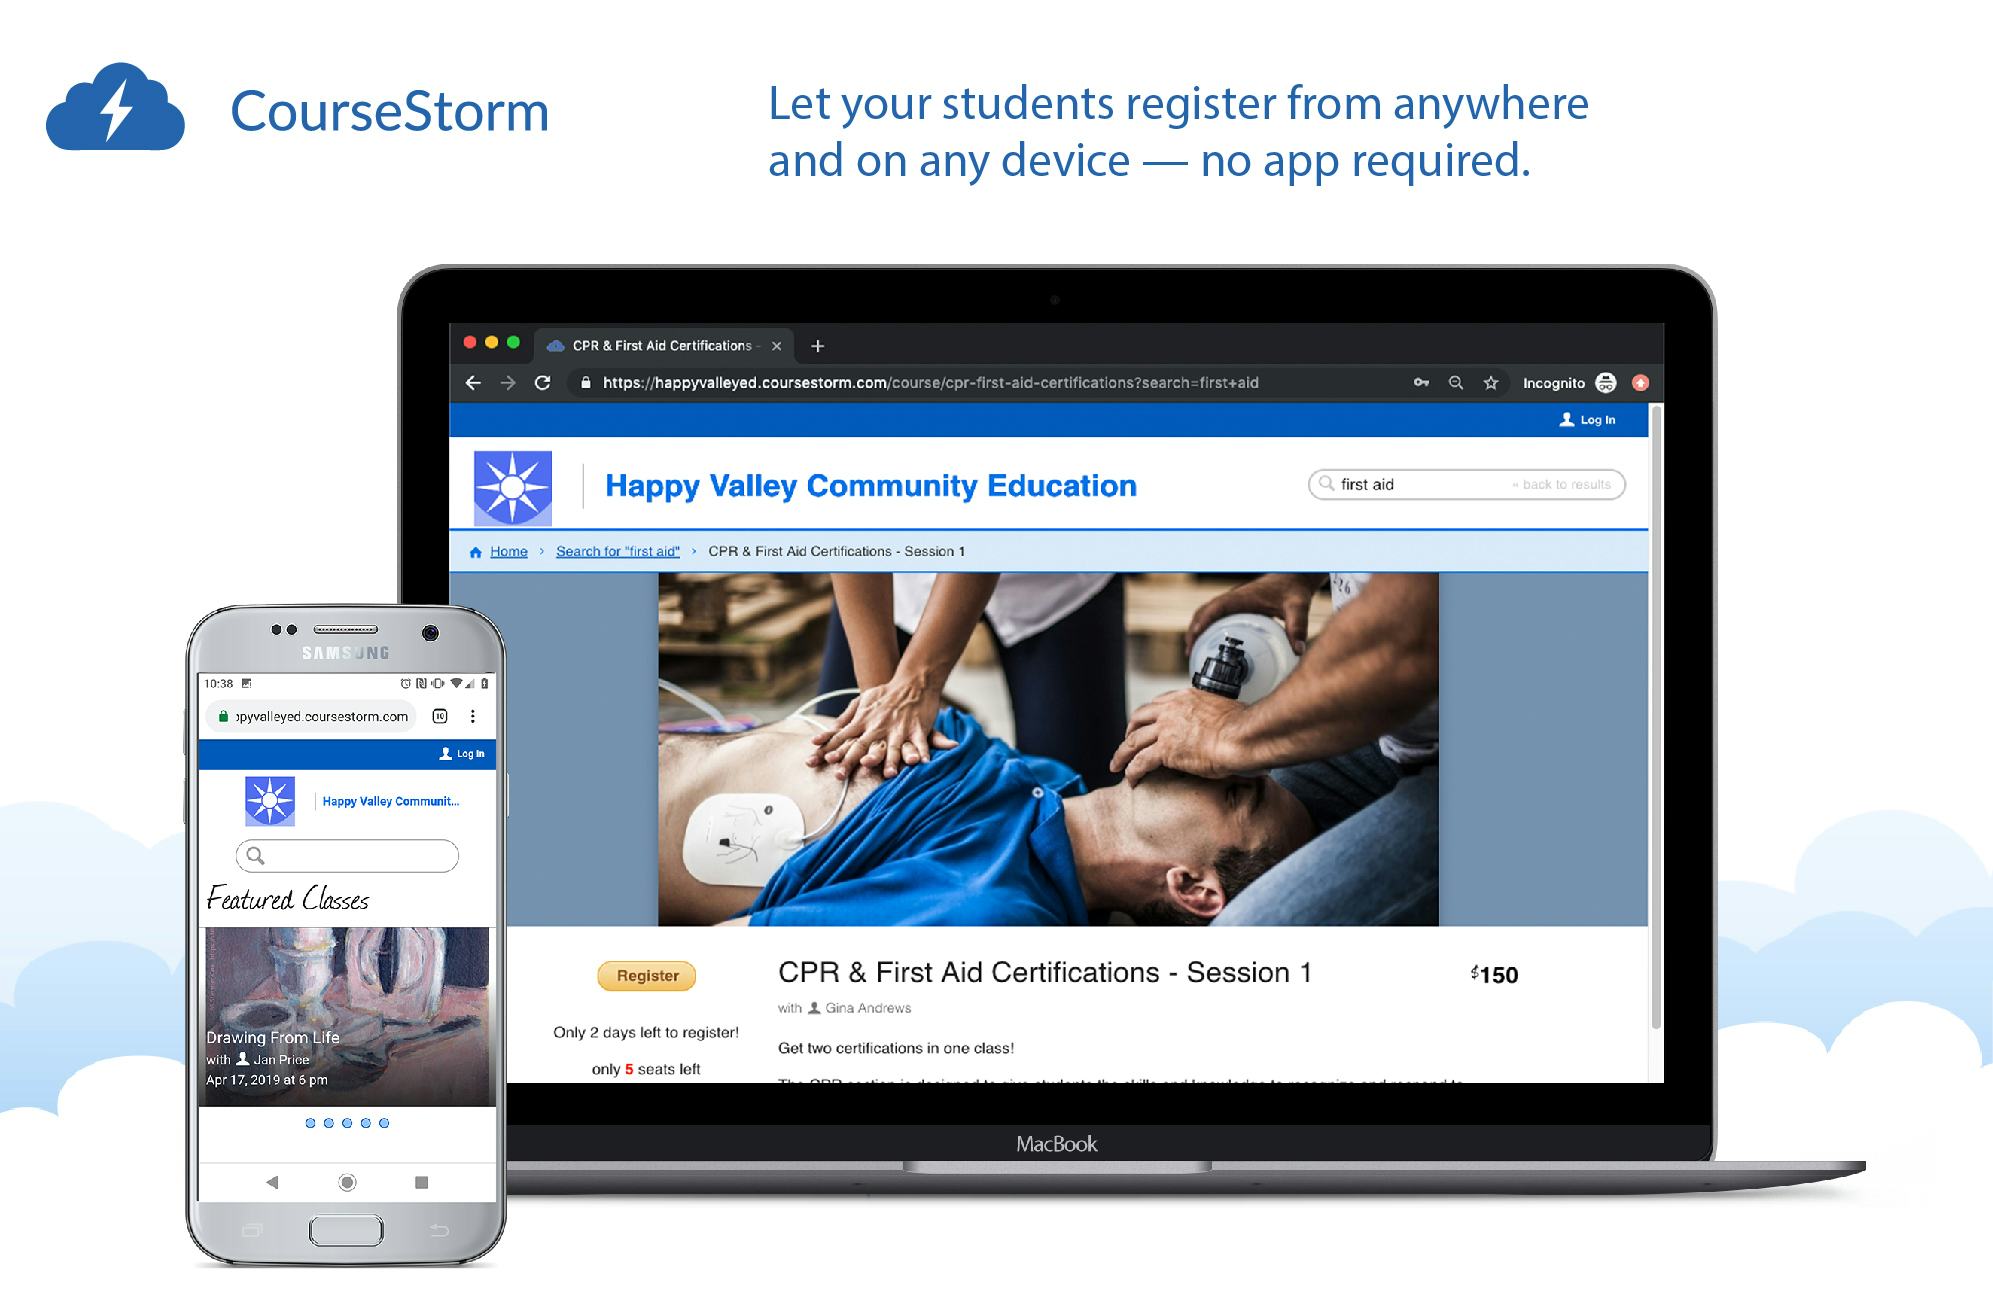 CourseStorm Software - Let your students register from anywhere and on any device, no app required.